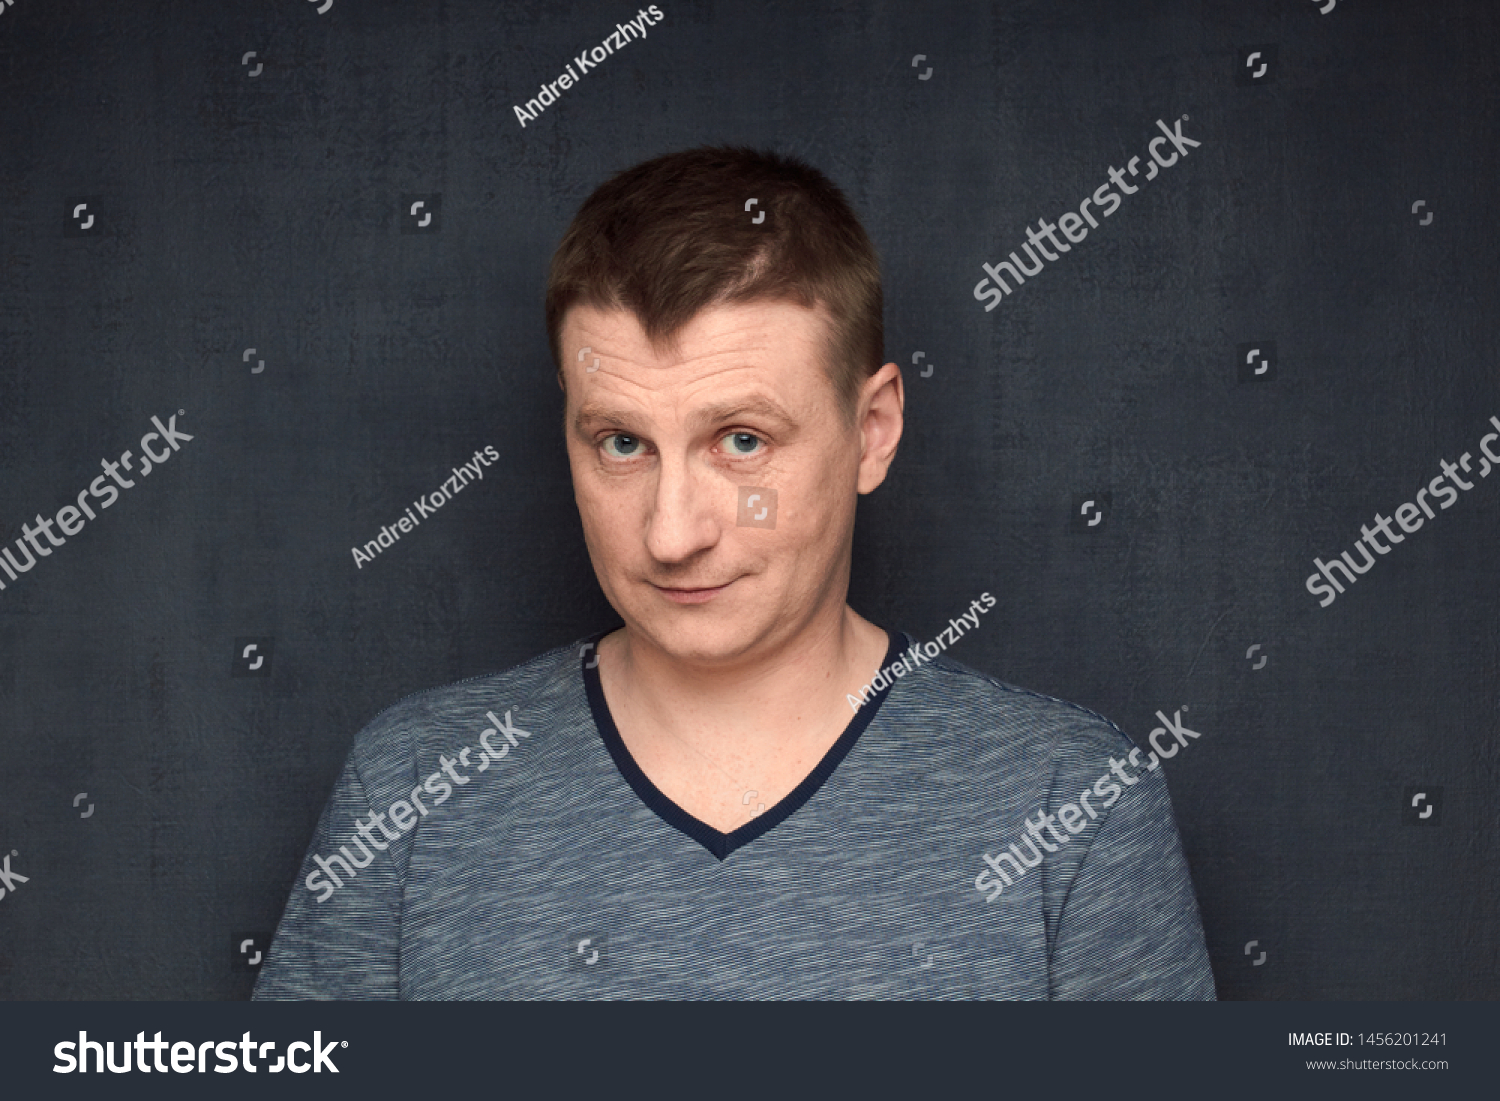 Studio close-up portrait of genial caucasian fair-haired man, wearing t-shirt, smiling kindly and and looking naively from under forehead at camera, making innocent face, against gray background #1456201241